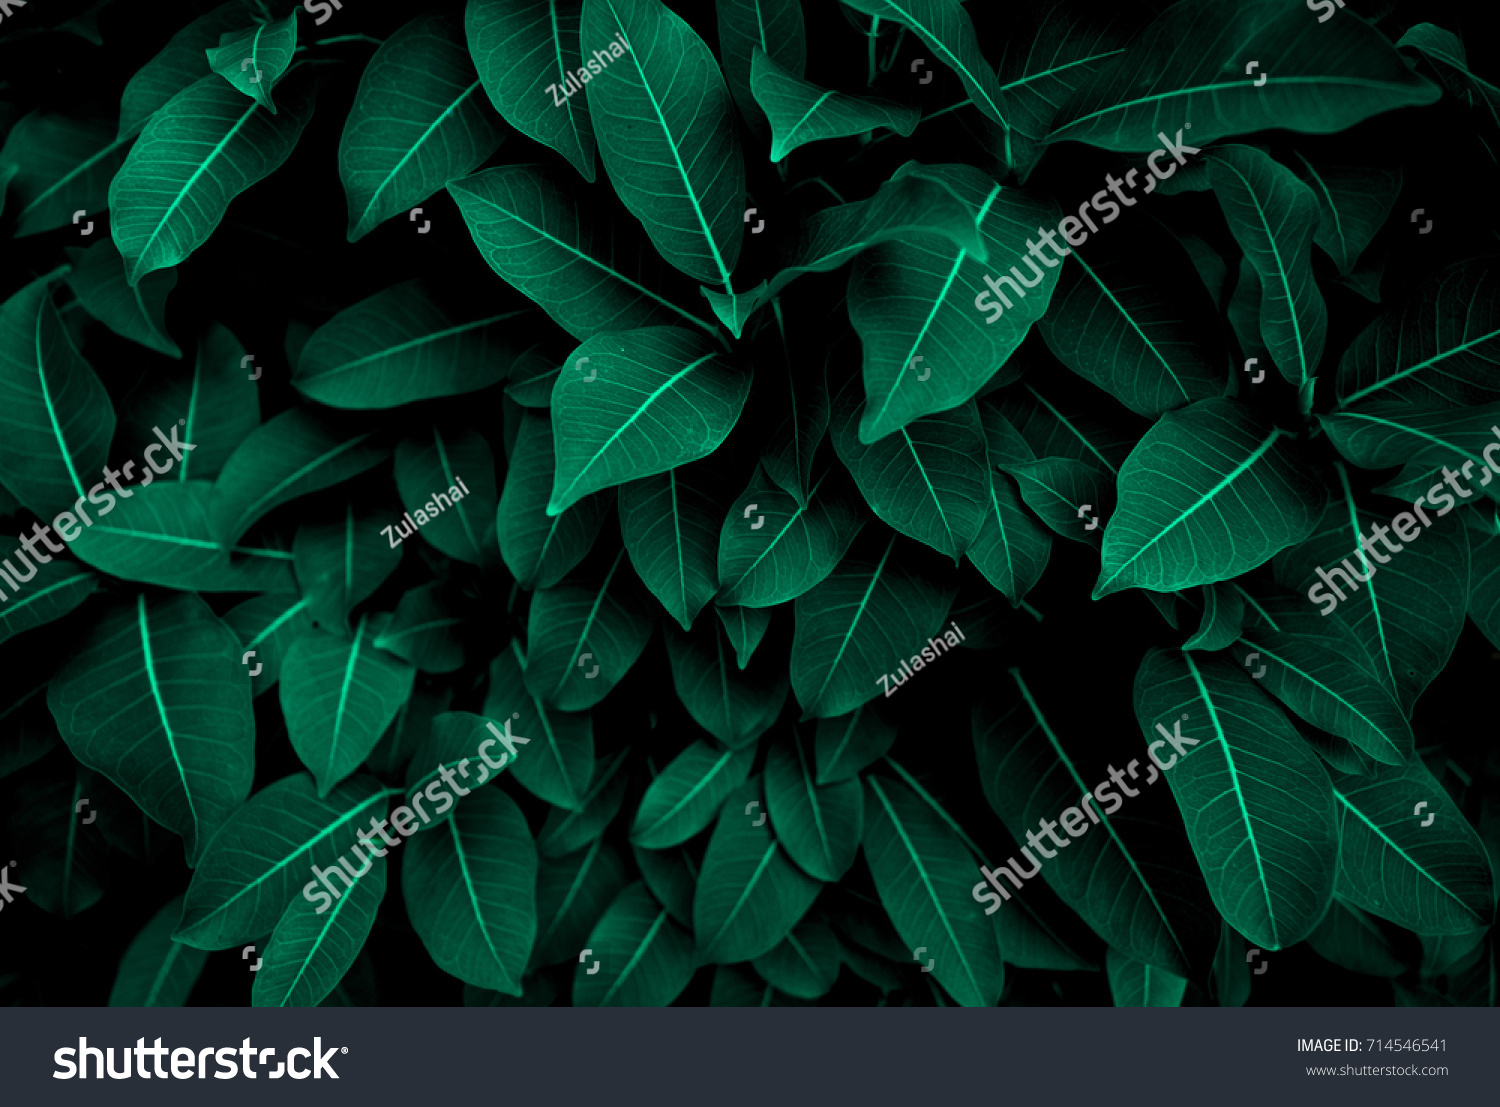 Green leaves pattern background, Natural background and wallpaper #714546541